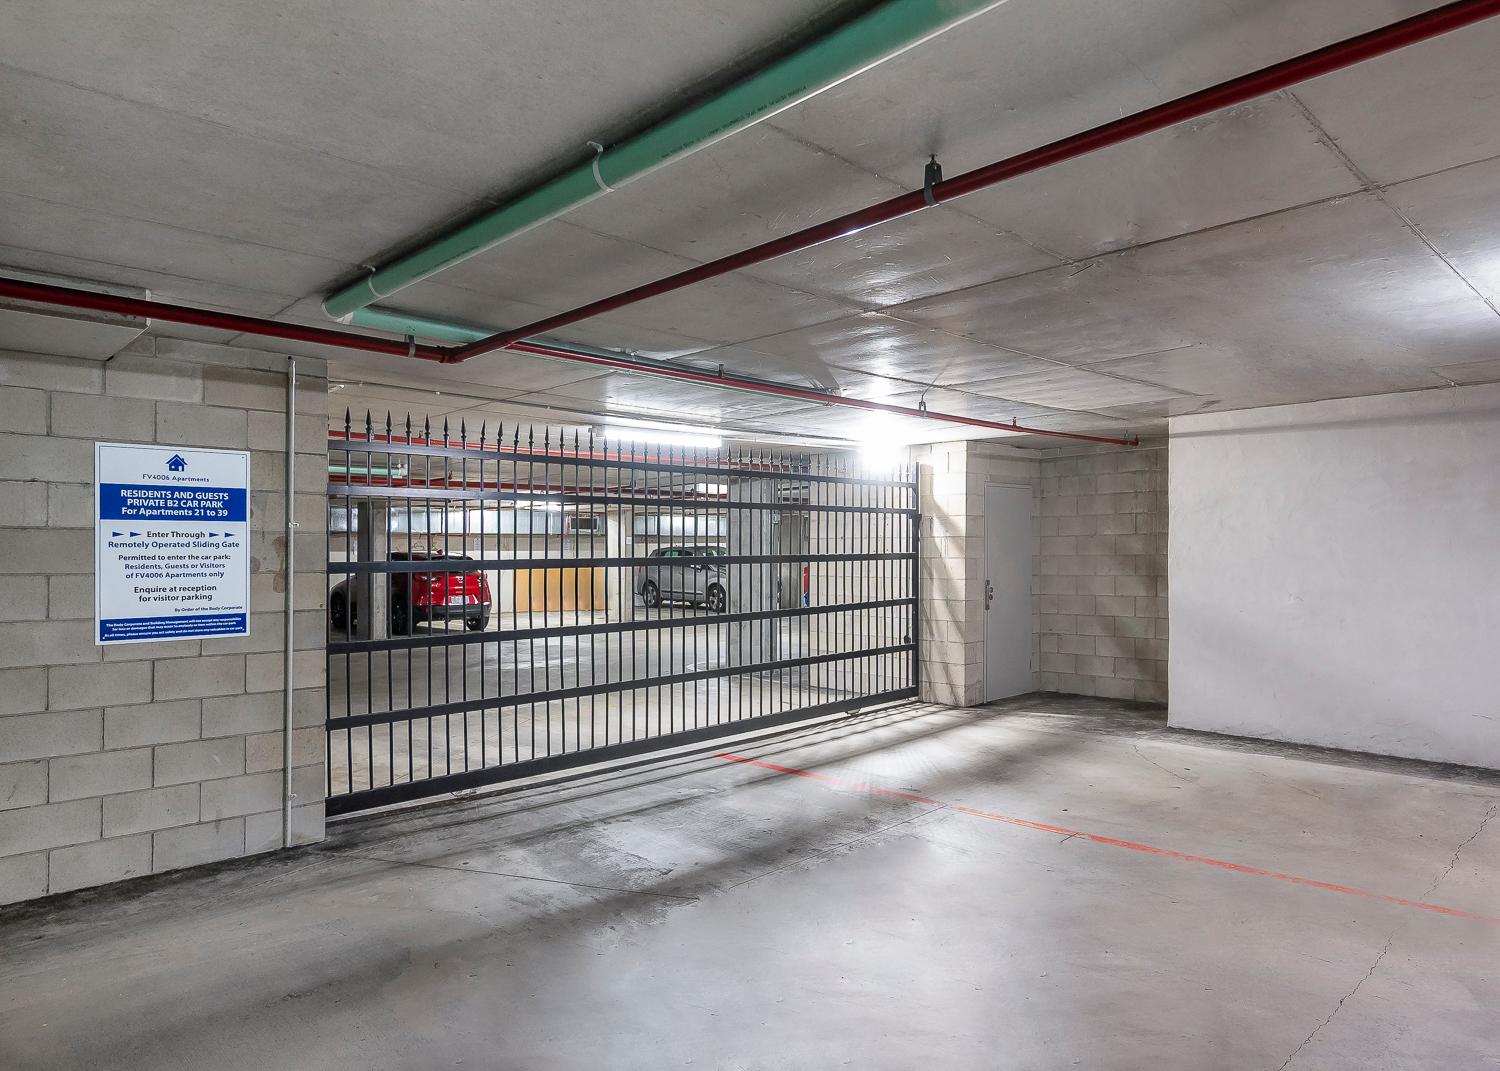 B2 carpark is gated by a sliding gate